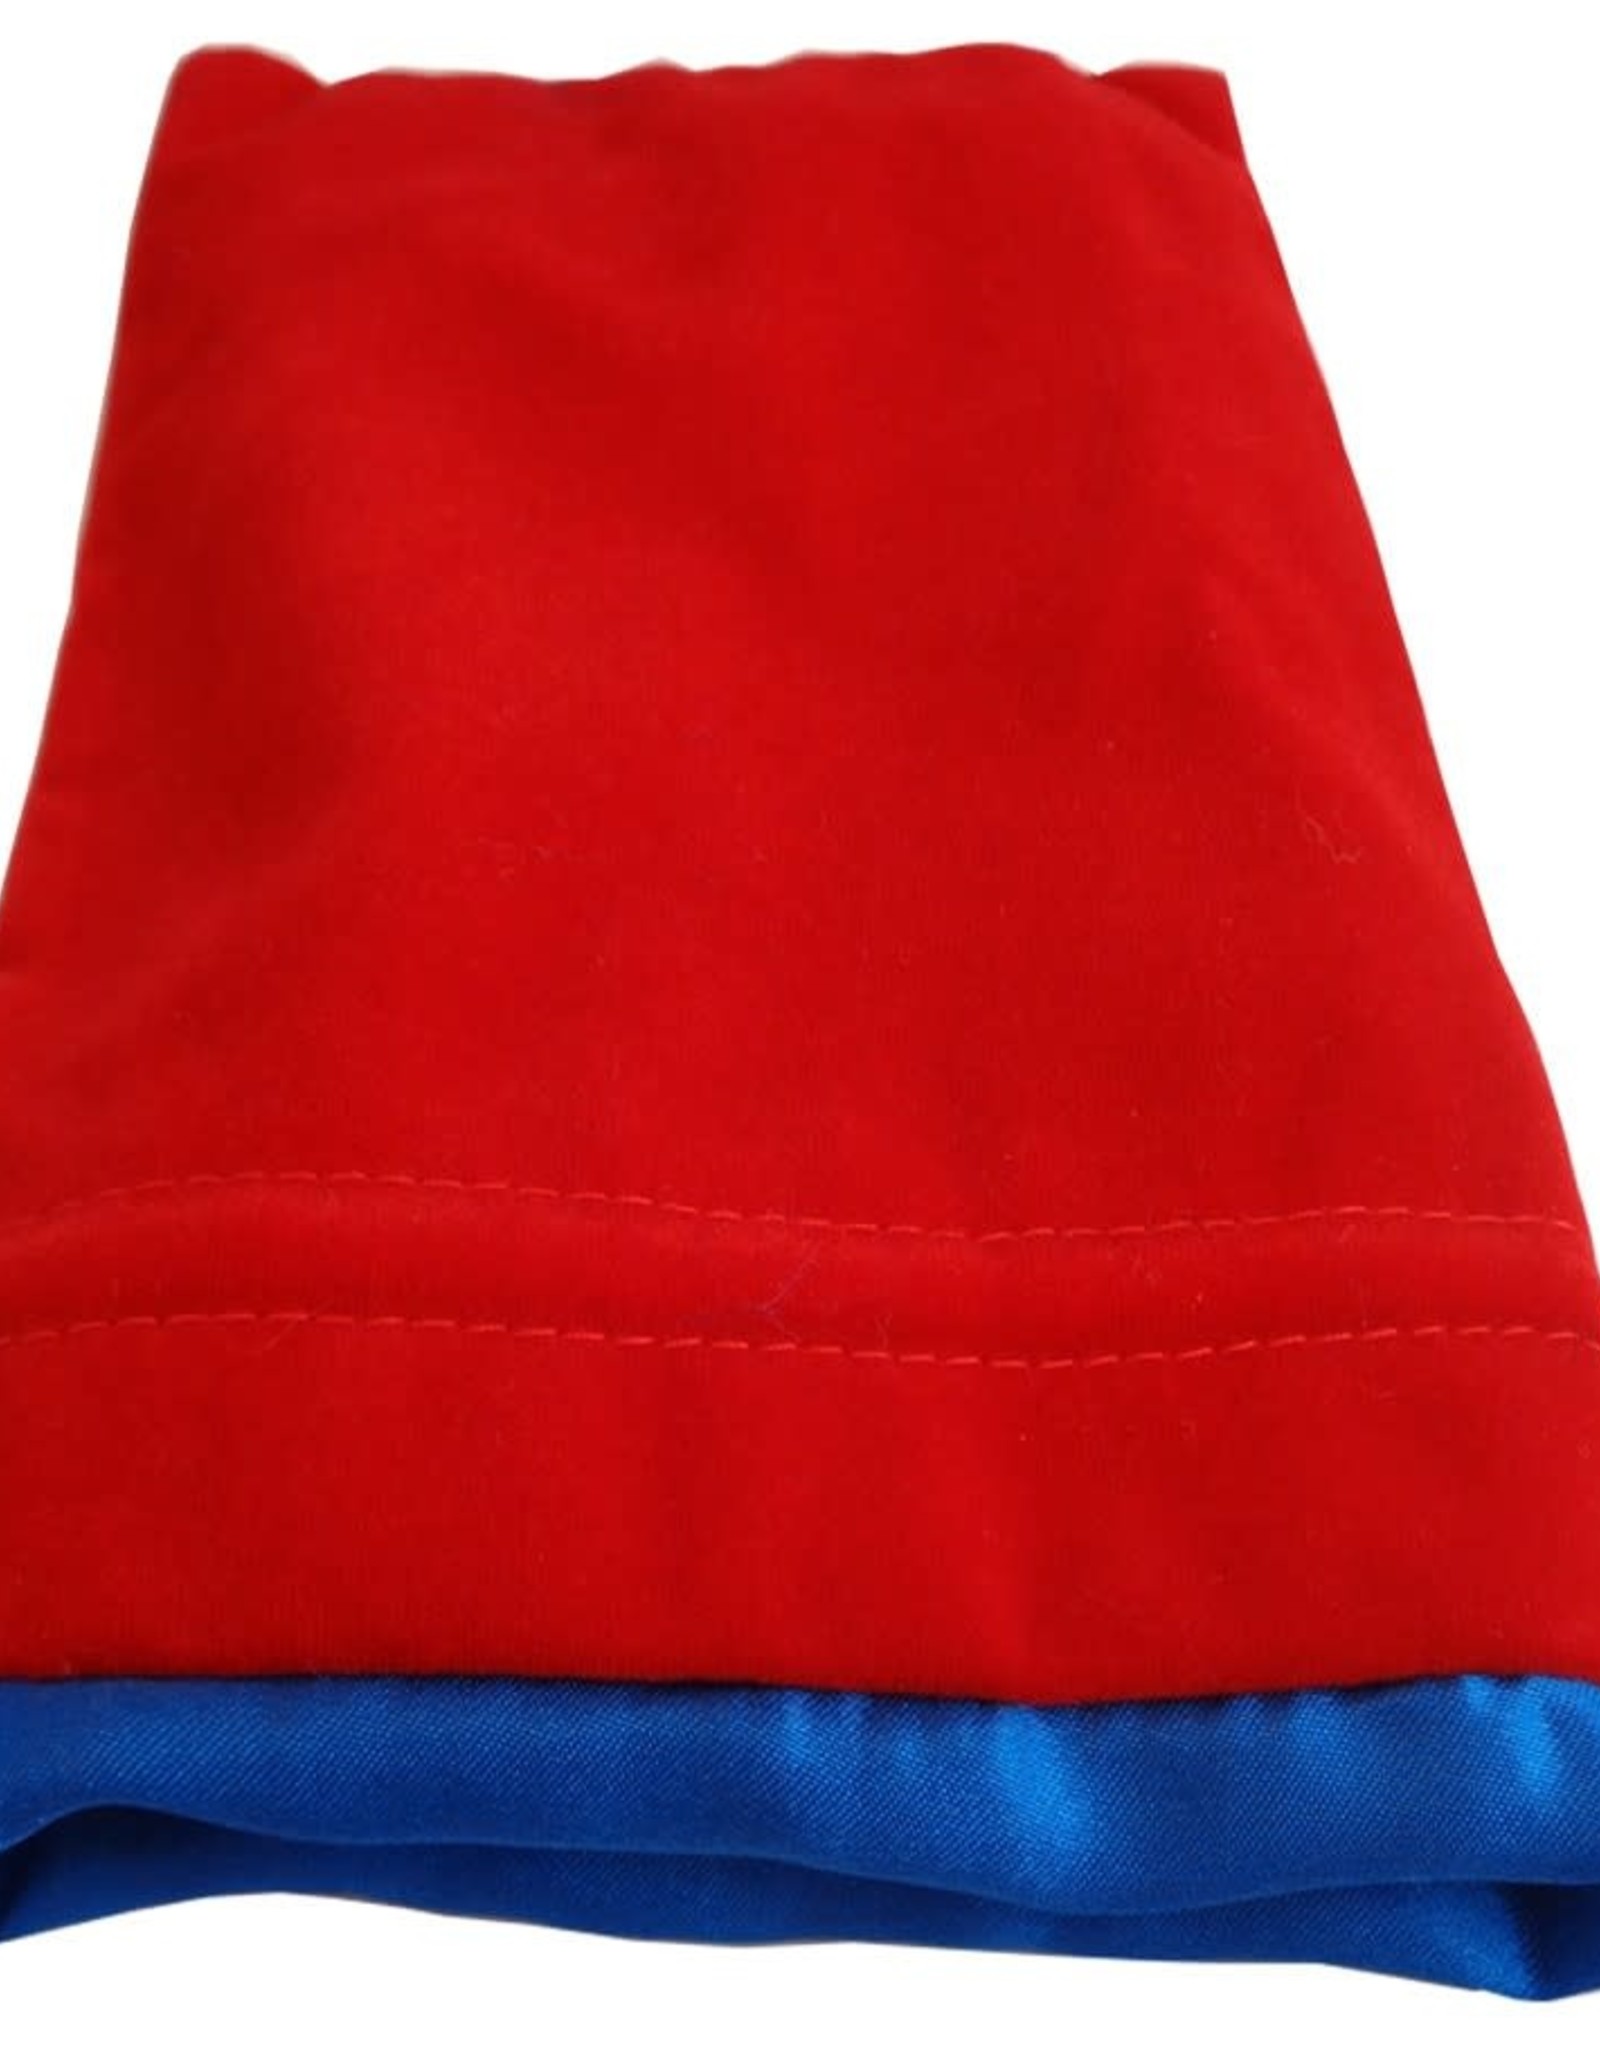 Metallic Dice Games Dice Bag: 6in x 8in LARGE Red Velvet with Blue Satin Lining